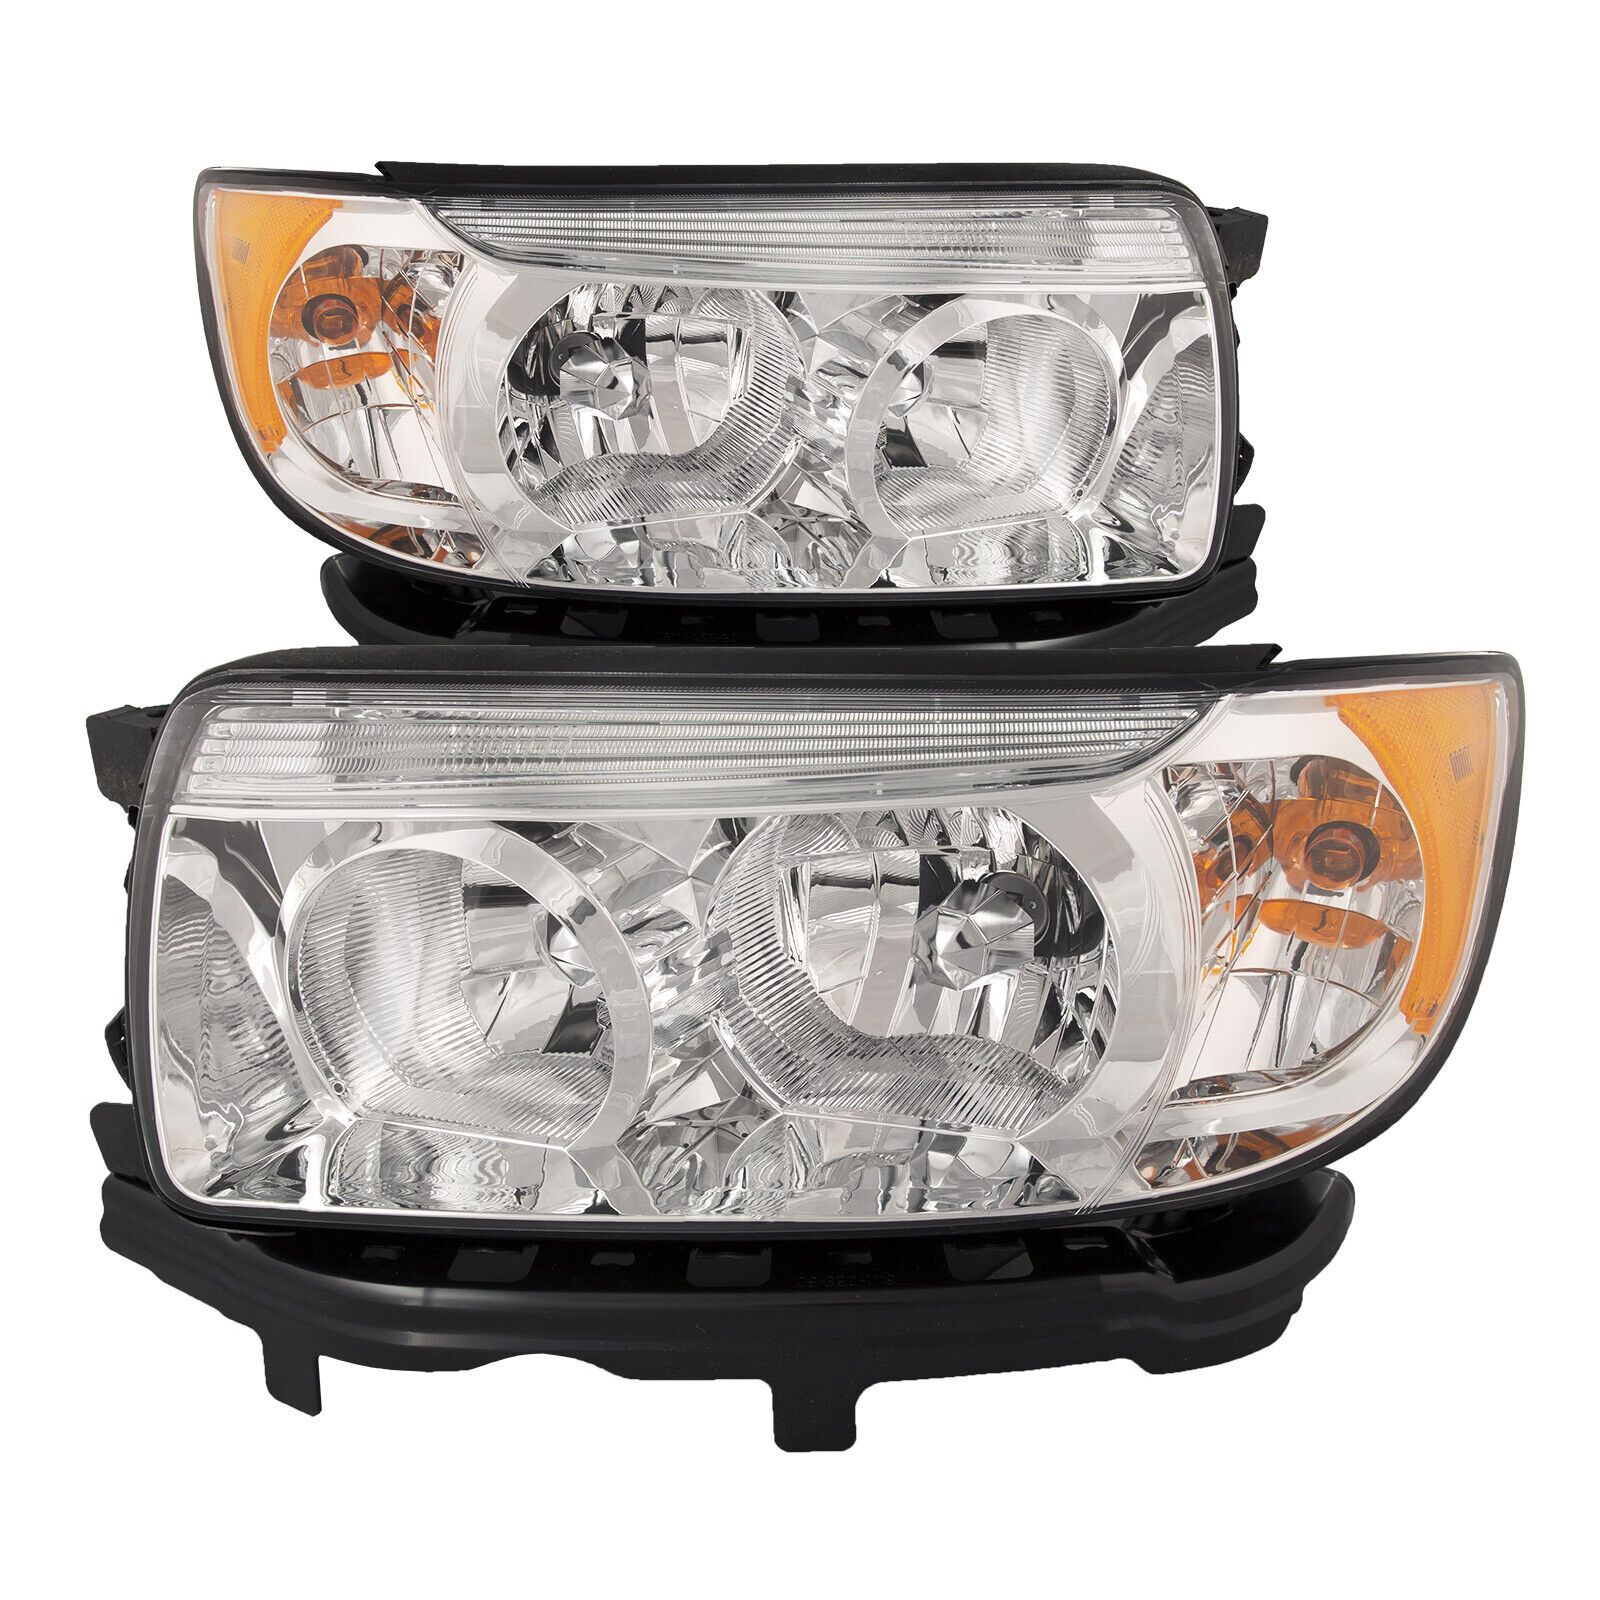 Headlights Chrome Set Fits 06-08 Subaru Forester 07-08 Forester